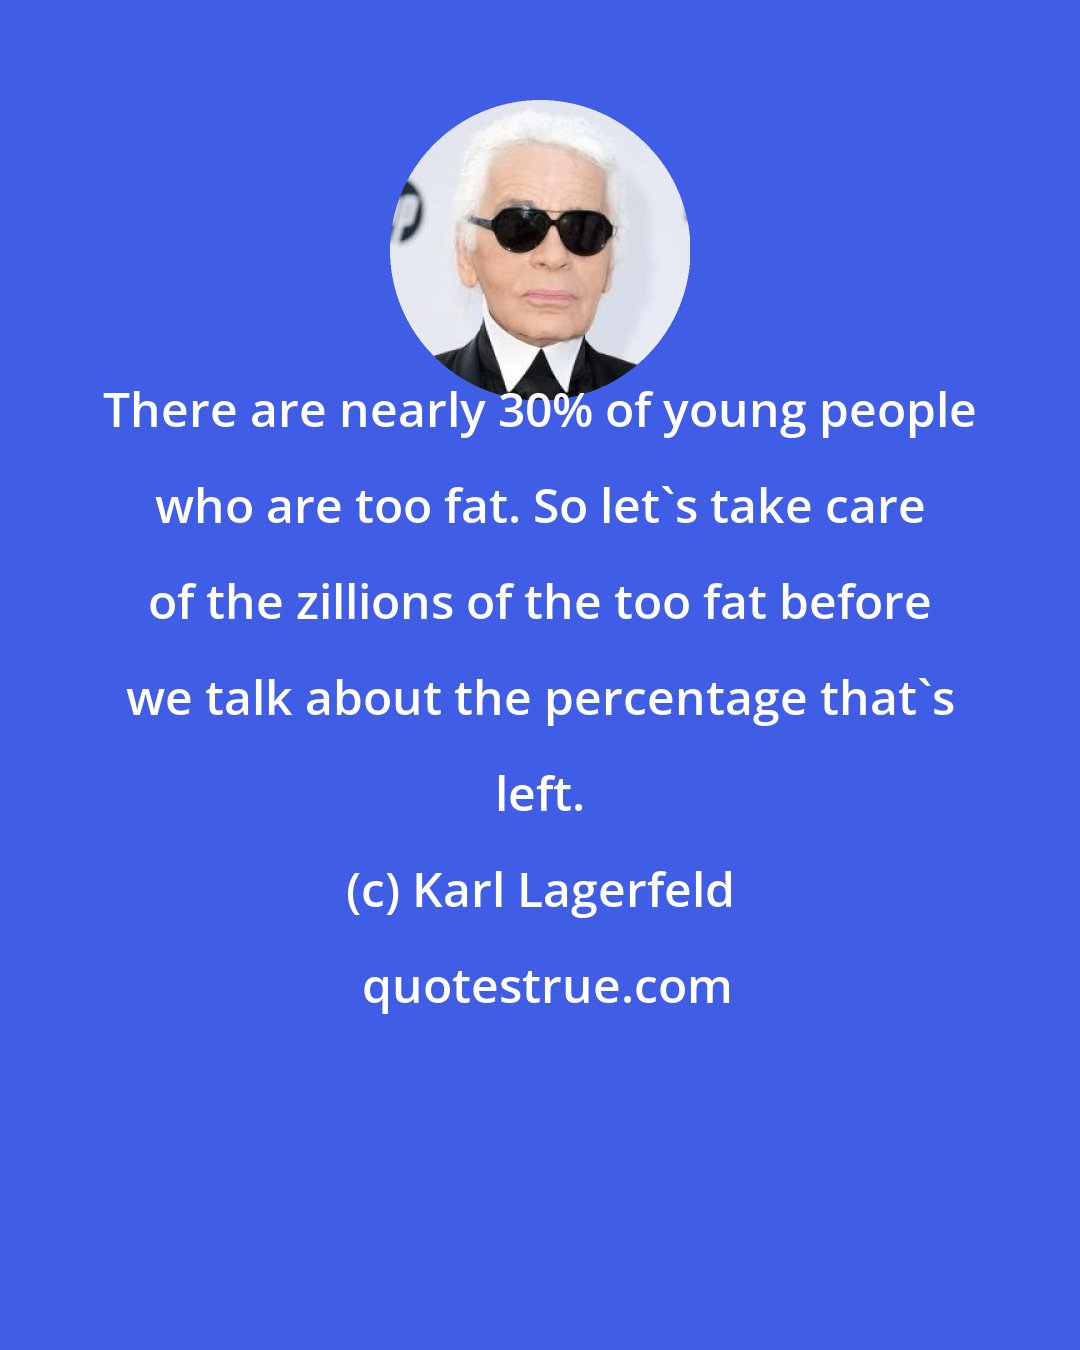 Karl Lagerfeld: There are nearly 30% of young people who are too fat. So let's take care of the zillions of the too fat before we talk about the percentage that's left.